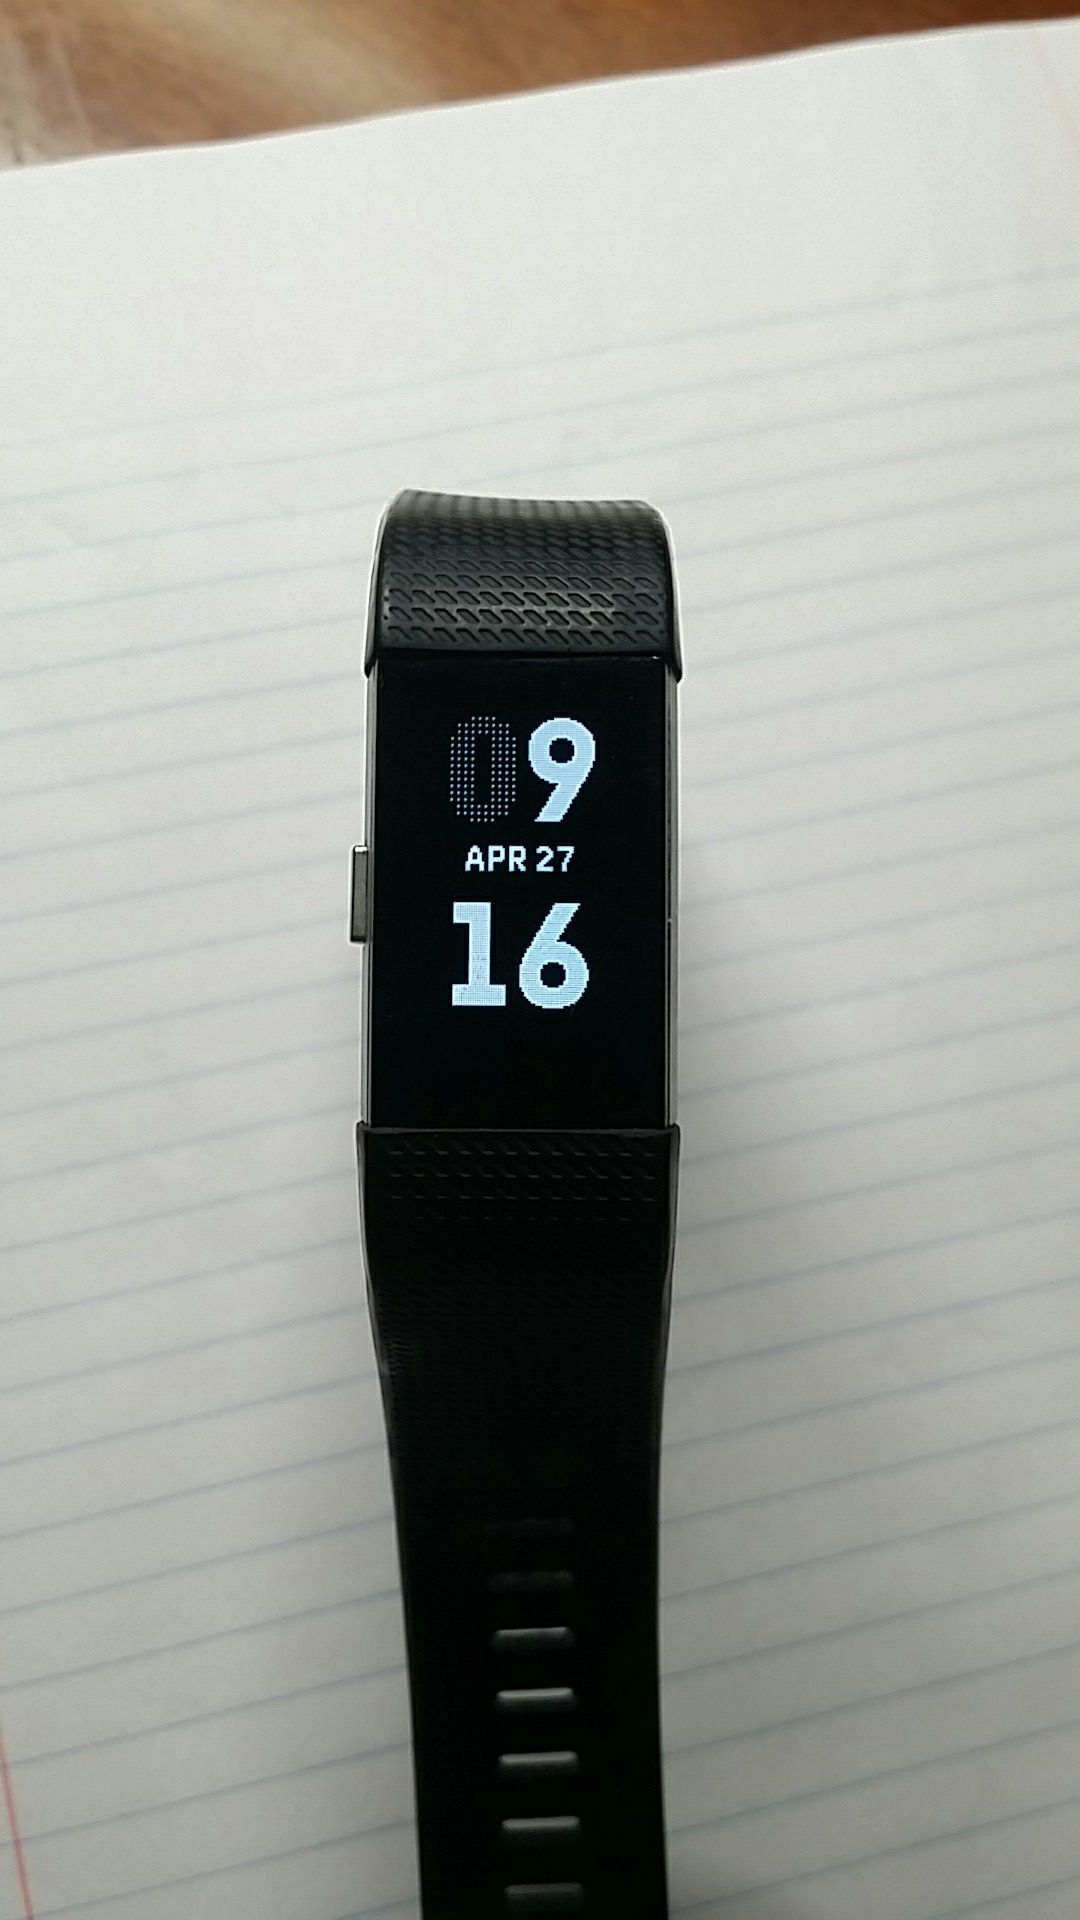 Slightly used Fitbit Charge 2